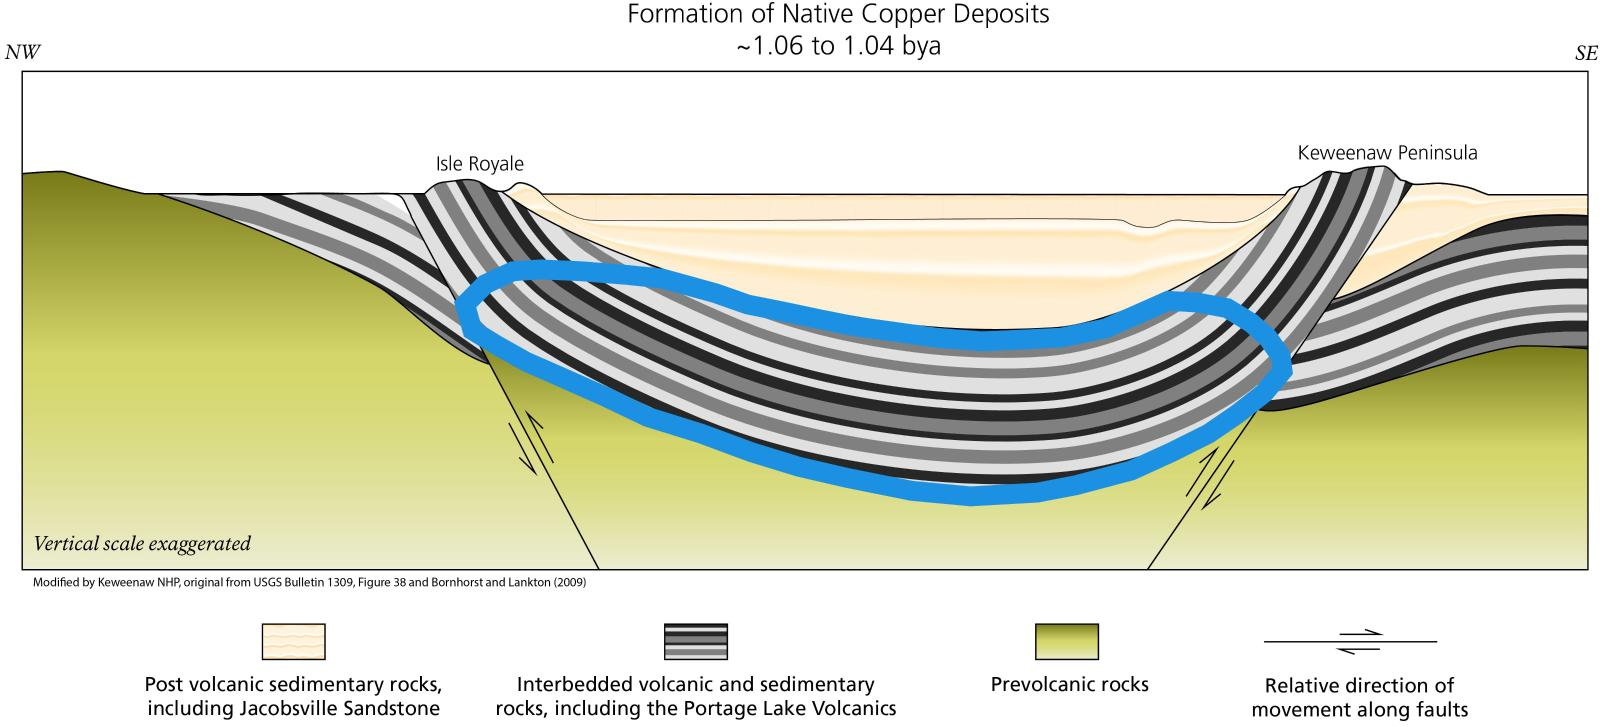 Cross sectional illustration showing rock types. Volcanic and sedimentary rocks form a bowl shape, with Isle Royale and the Keweenaw being opposite rims of the bowl. Blue outlines the bottom part of the bowl.